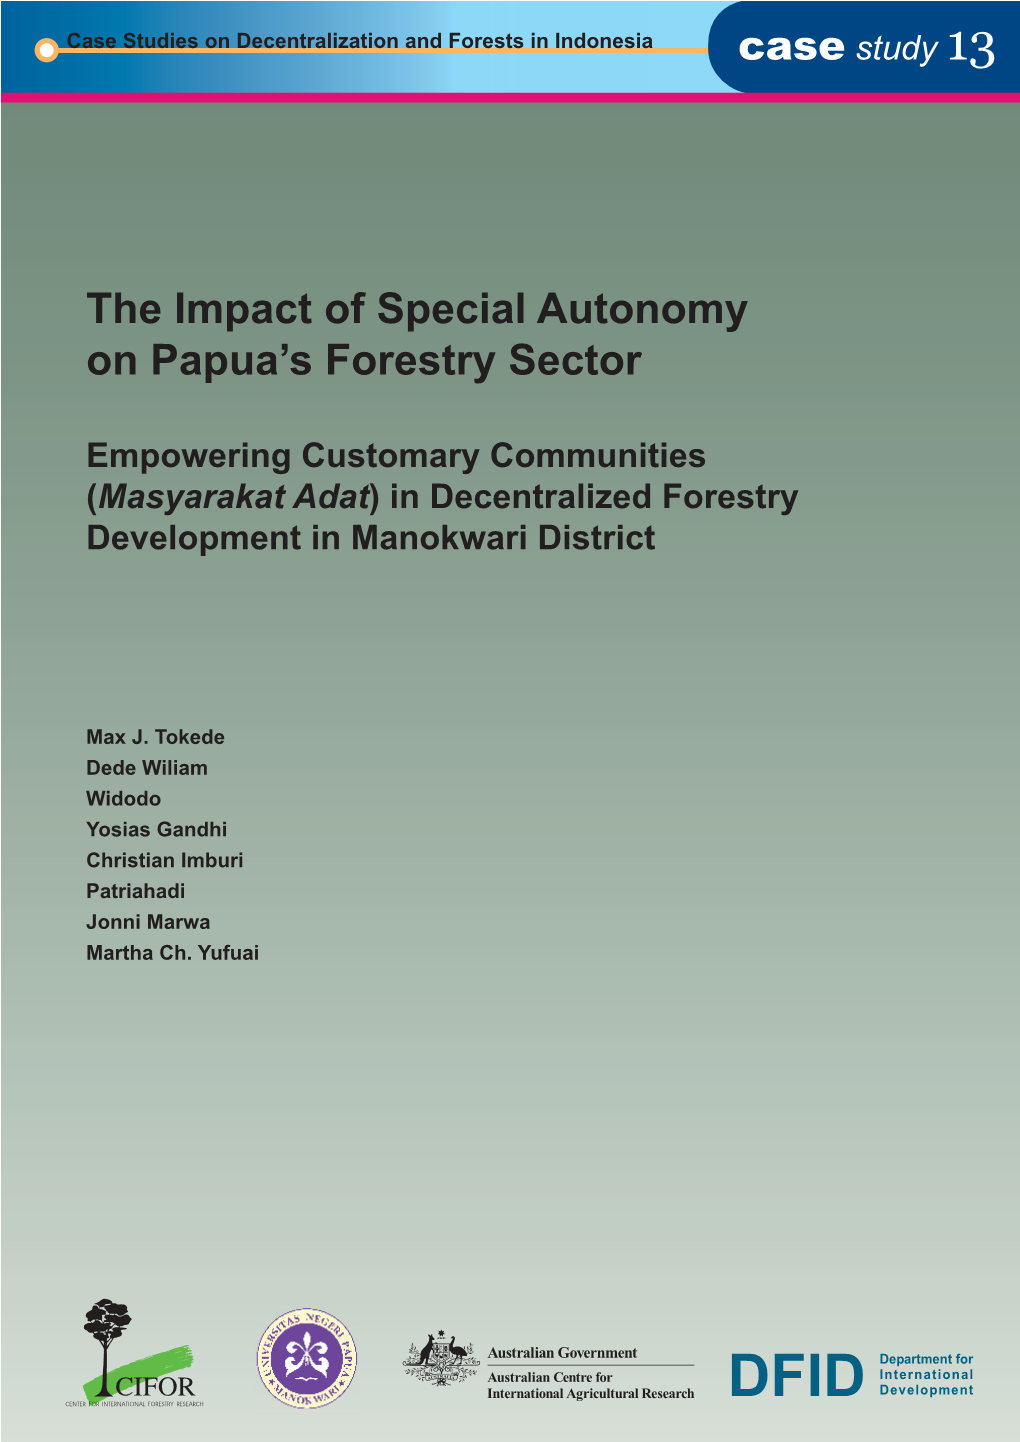 The Impact of Special Autonomy on Papua's Forestry Sector